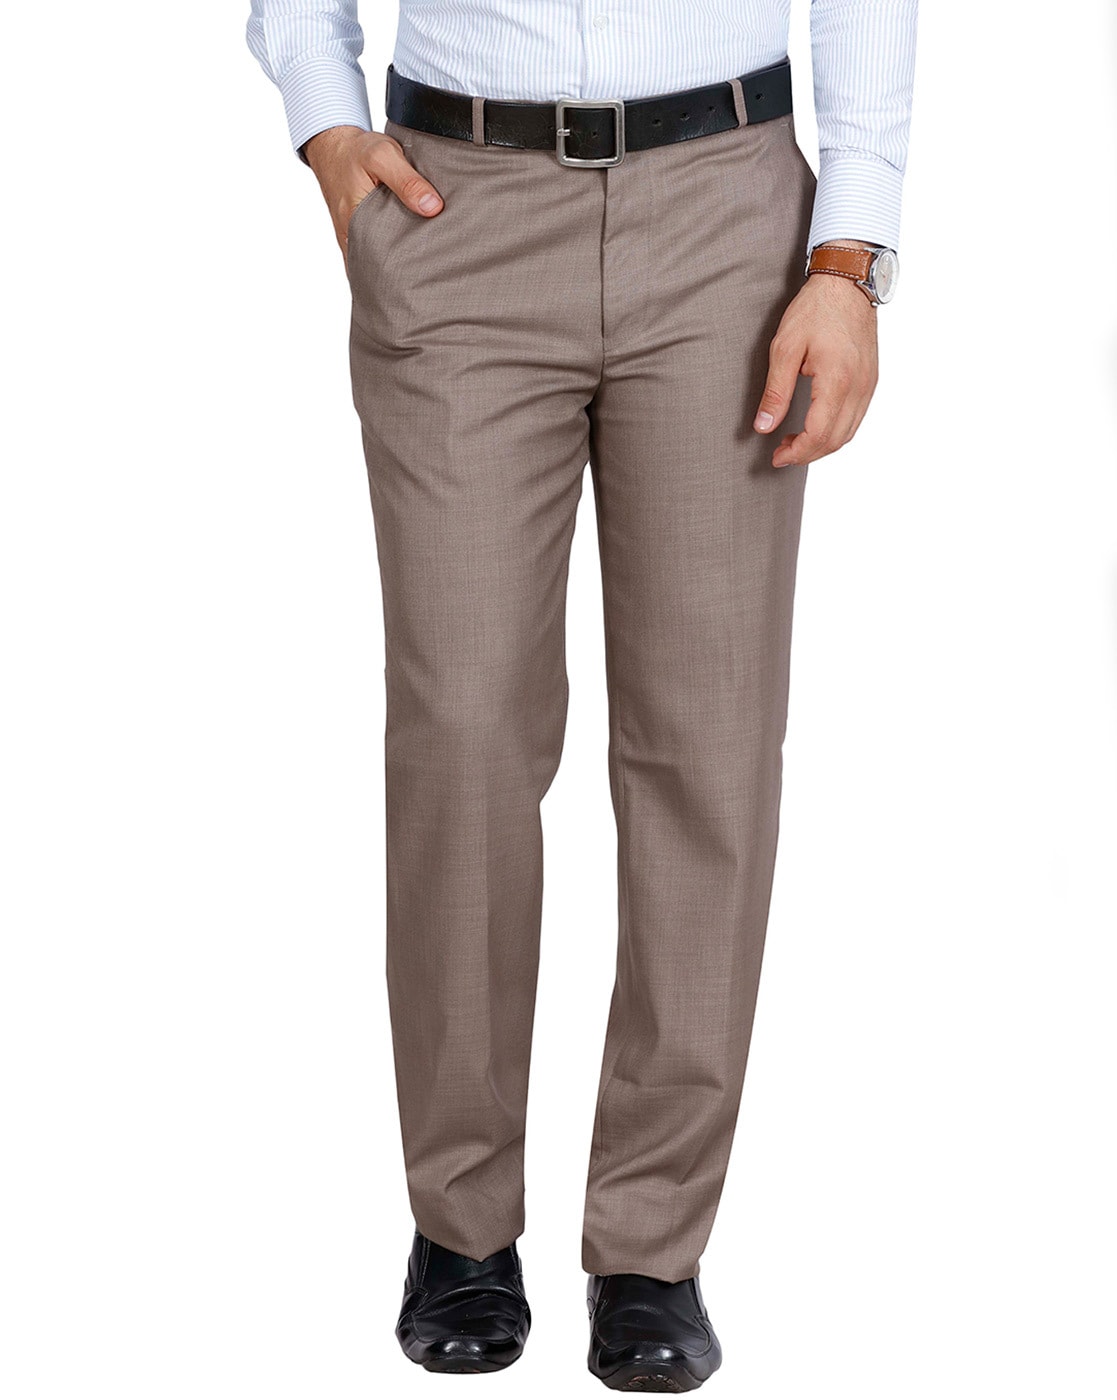 Tibre Beige Regular Pleated Trousers - Buy Tibre Beige Regular Pleated Trousers  Online at Best Prices in India on Snapdeal